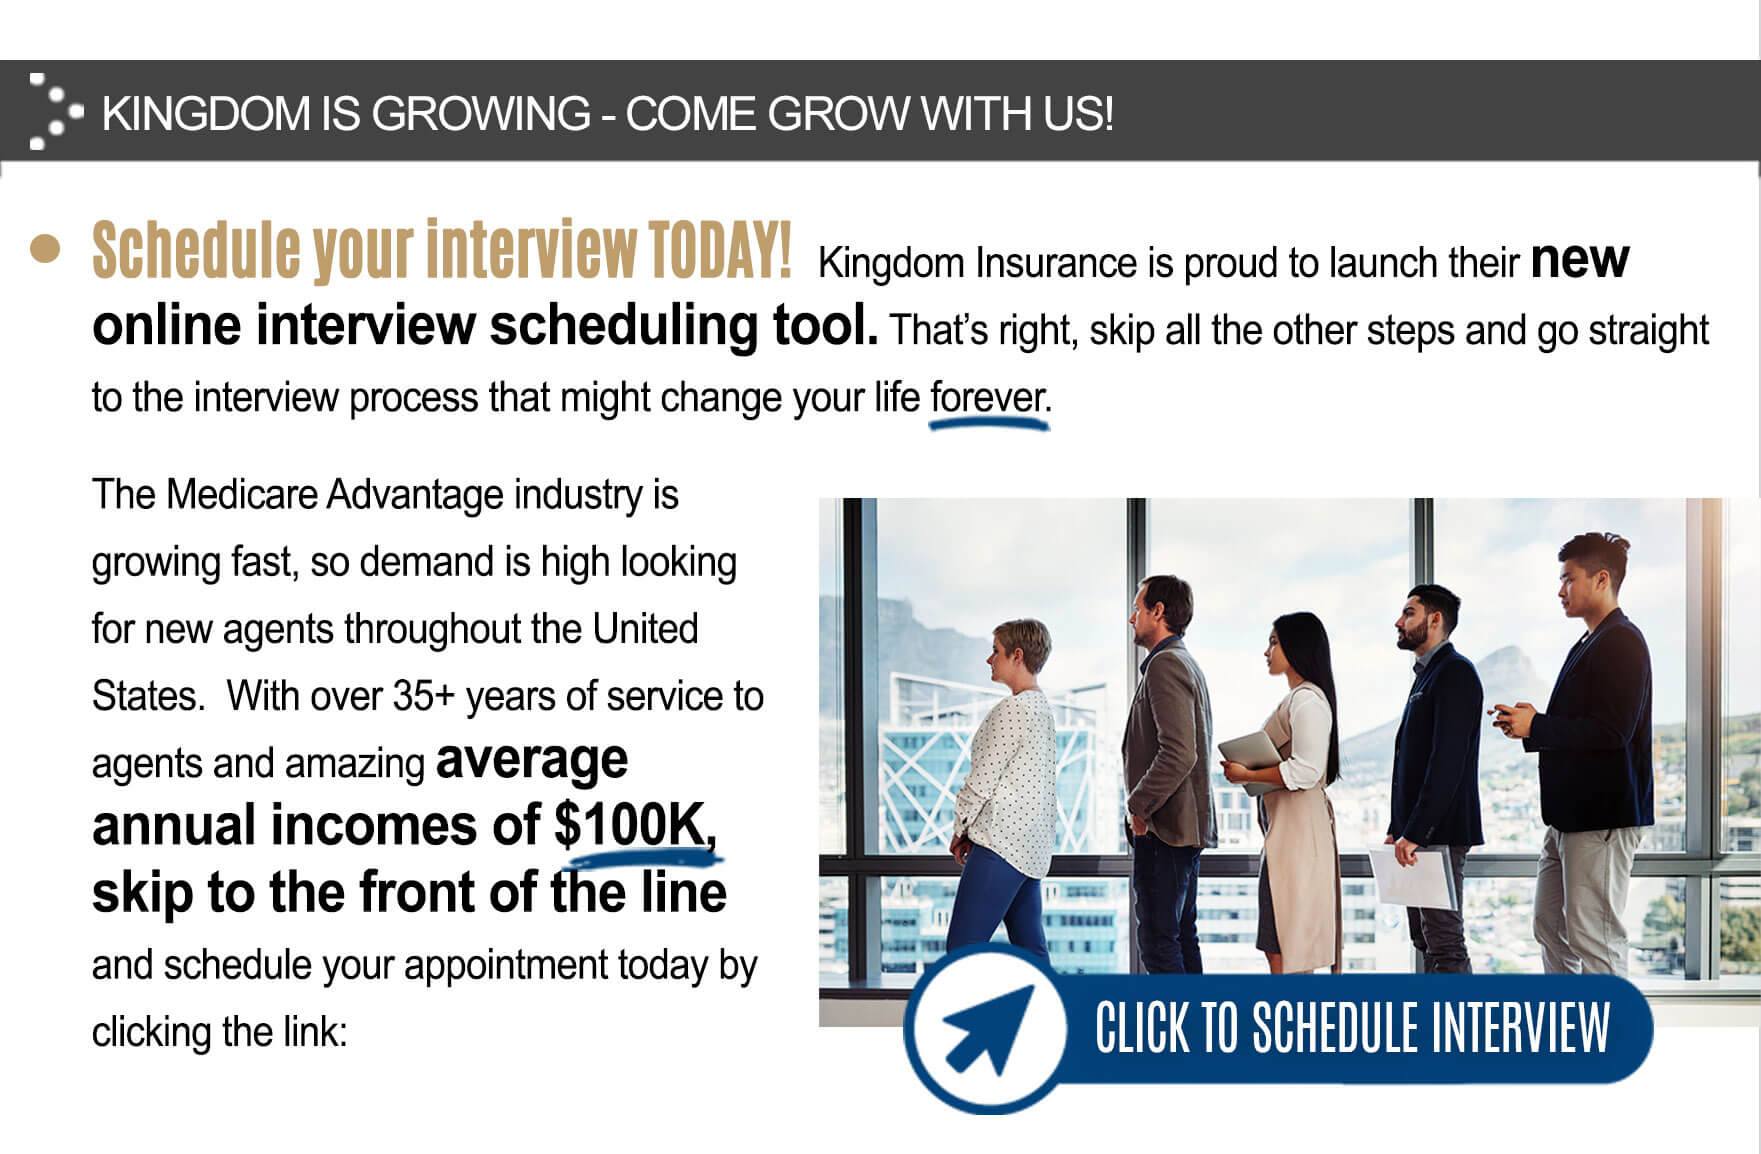 Schedule your interview today!